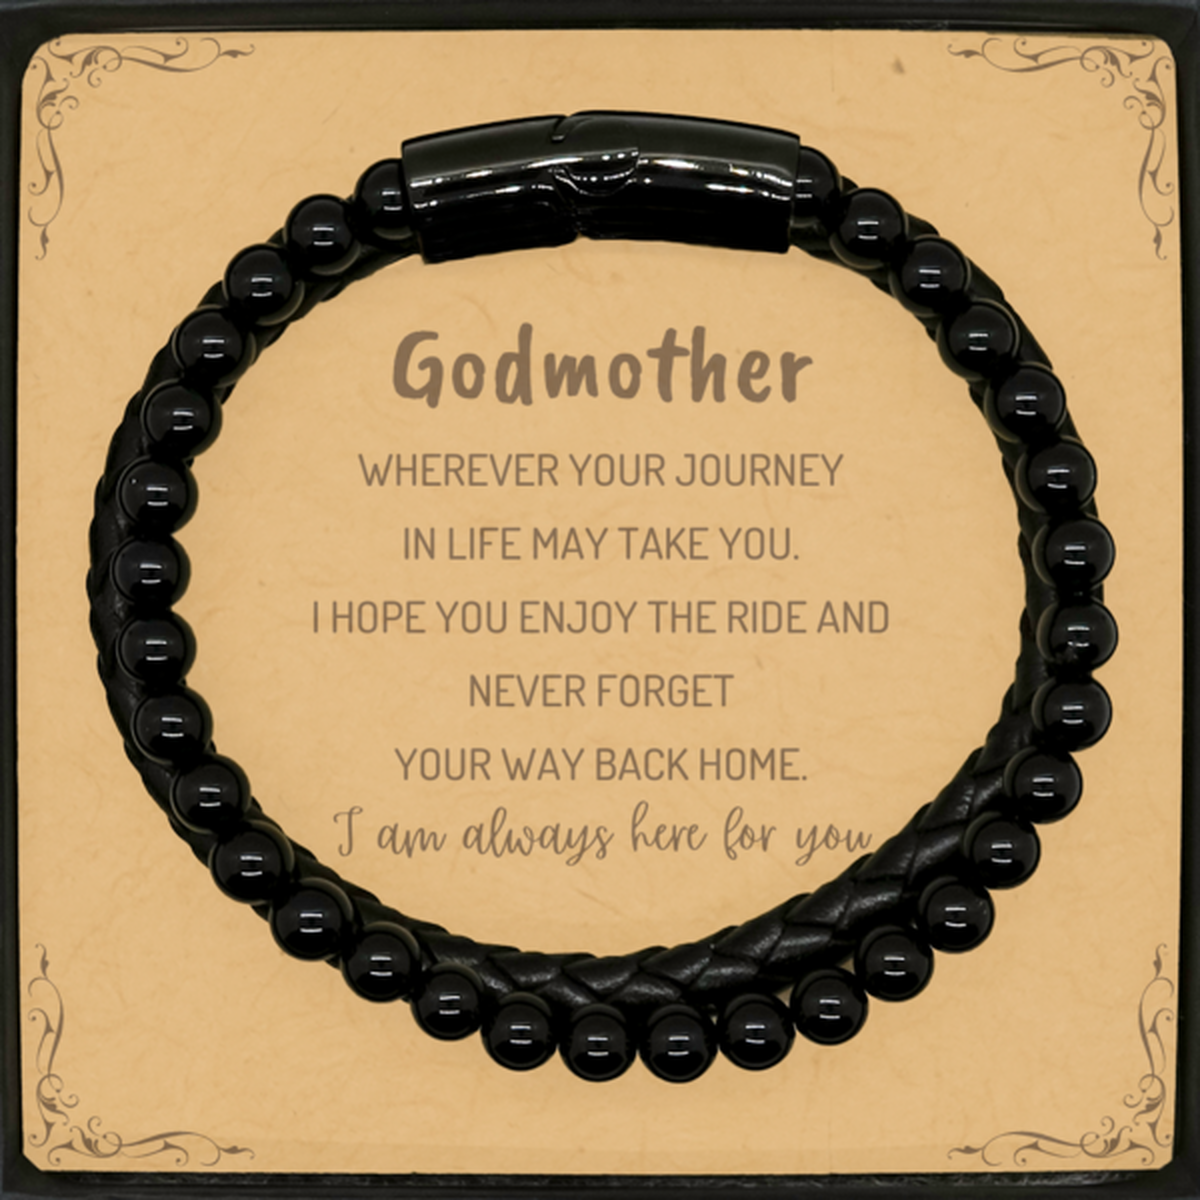 Godmother wherever your journey in life may take you, I am always here for you Godmother Stone Leather Bracelets, Awesome Christmas Gifts For Godmother Message Card, Godmother Birthday Gifts for Men Women Family Loved One